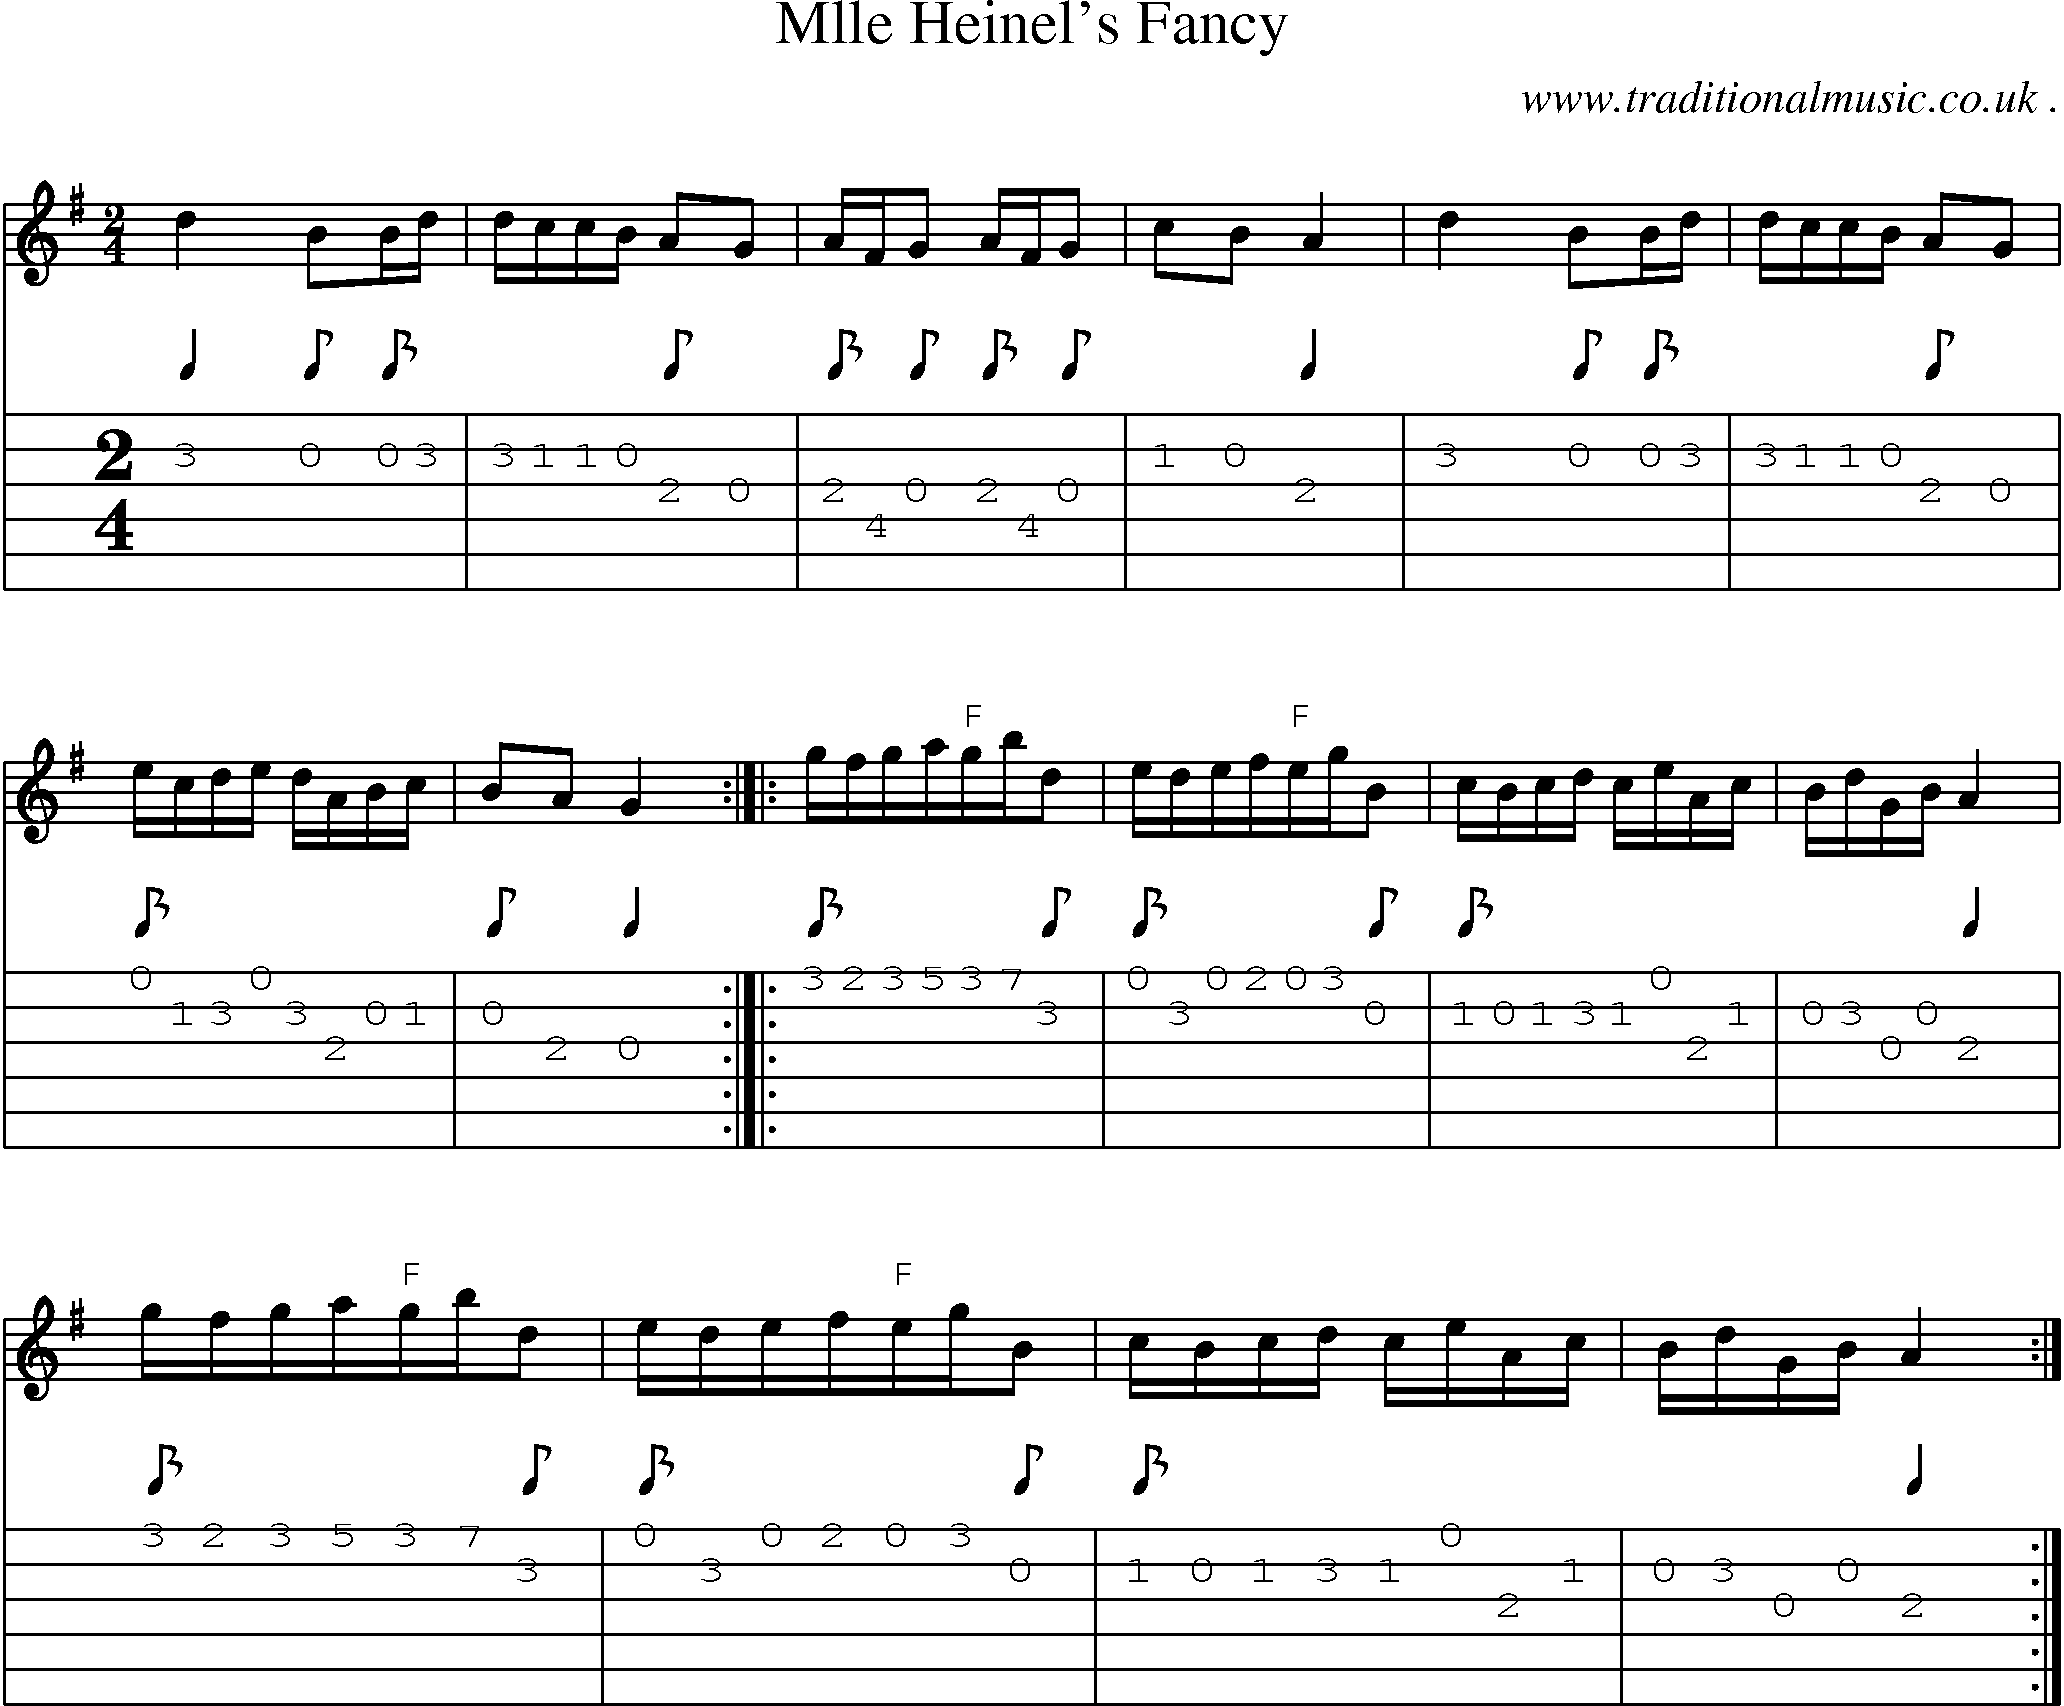 Sheet-Music and Guitar Tabs for Mlle Heinels Fancy